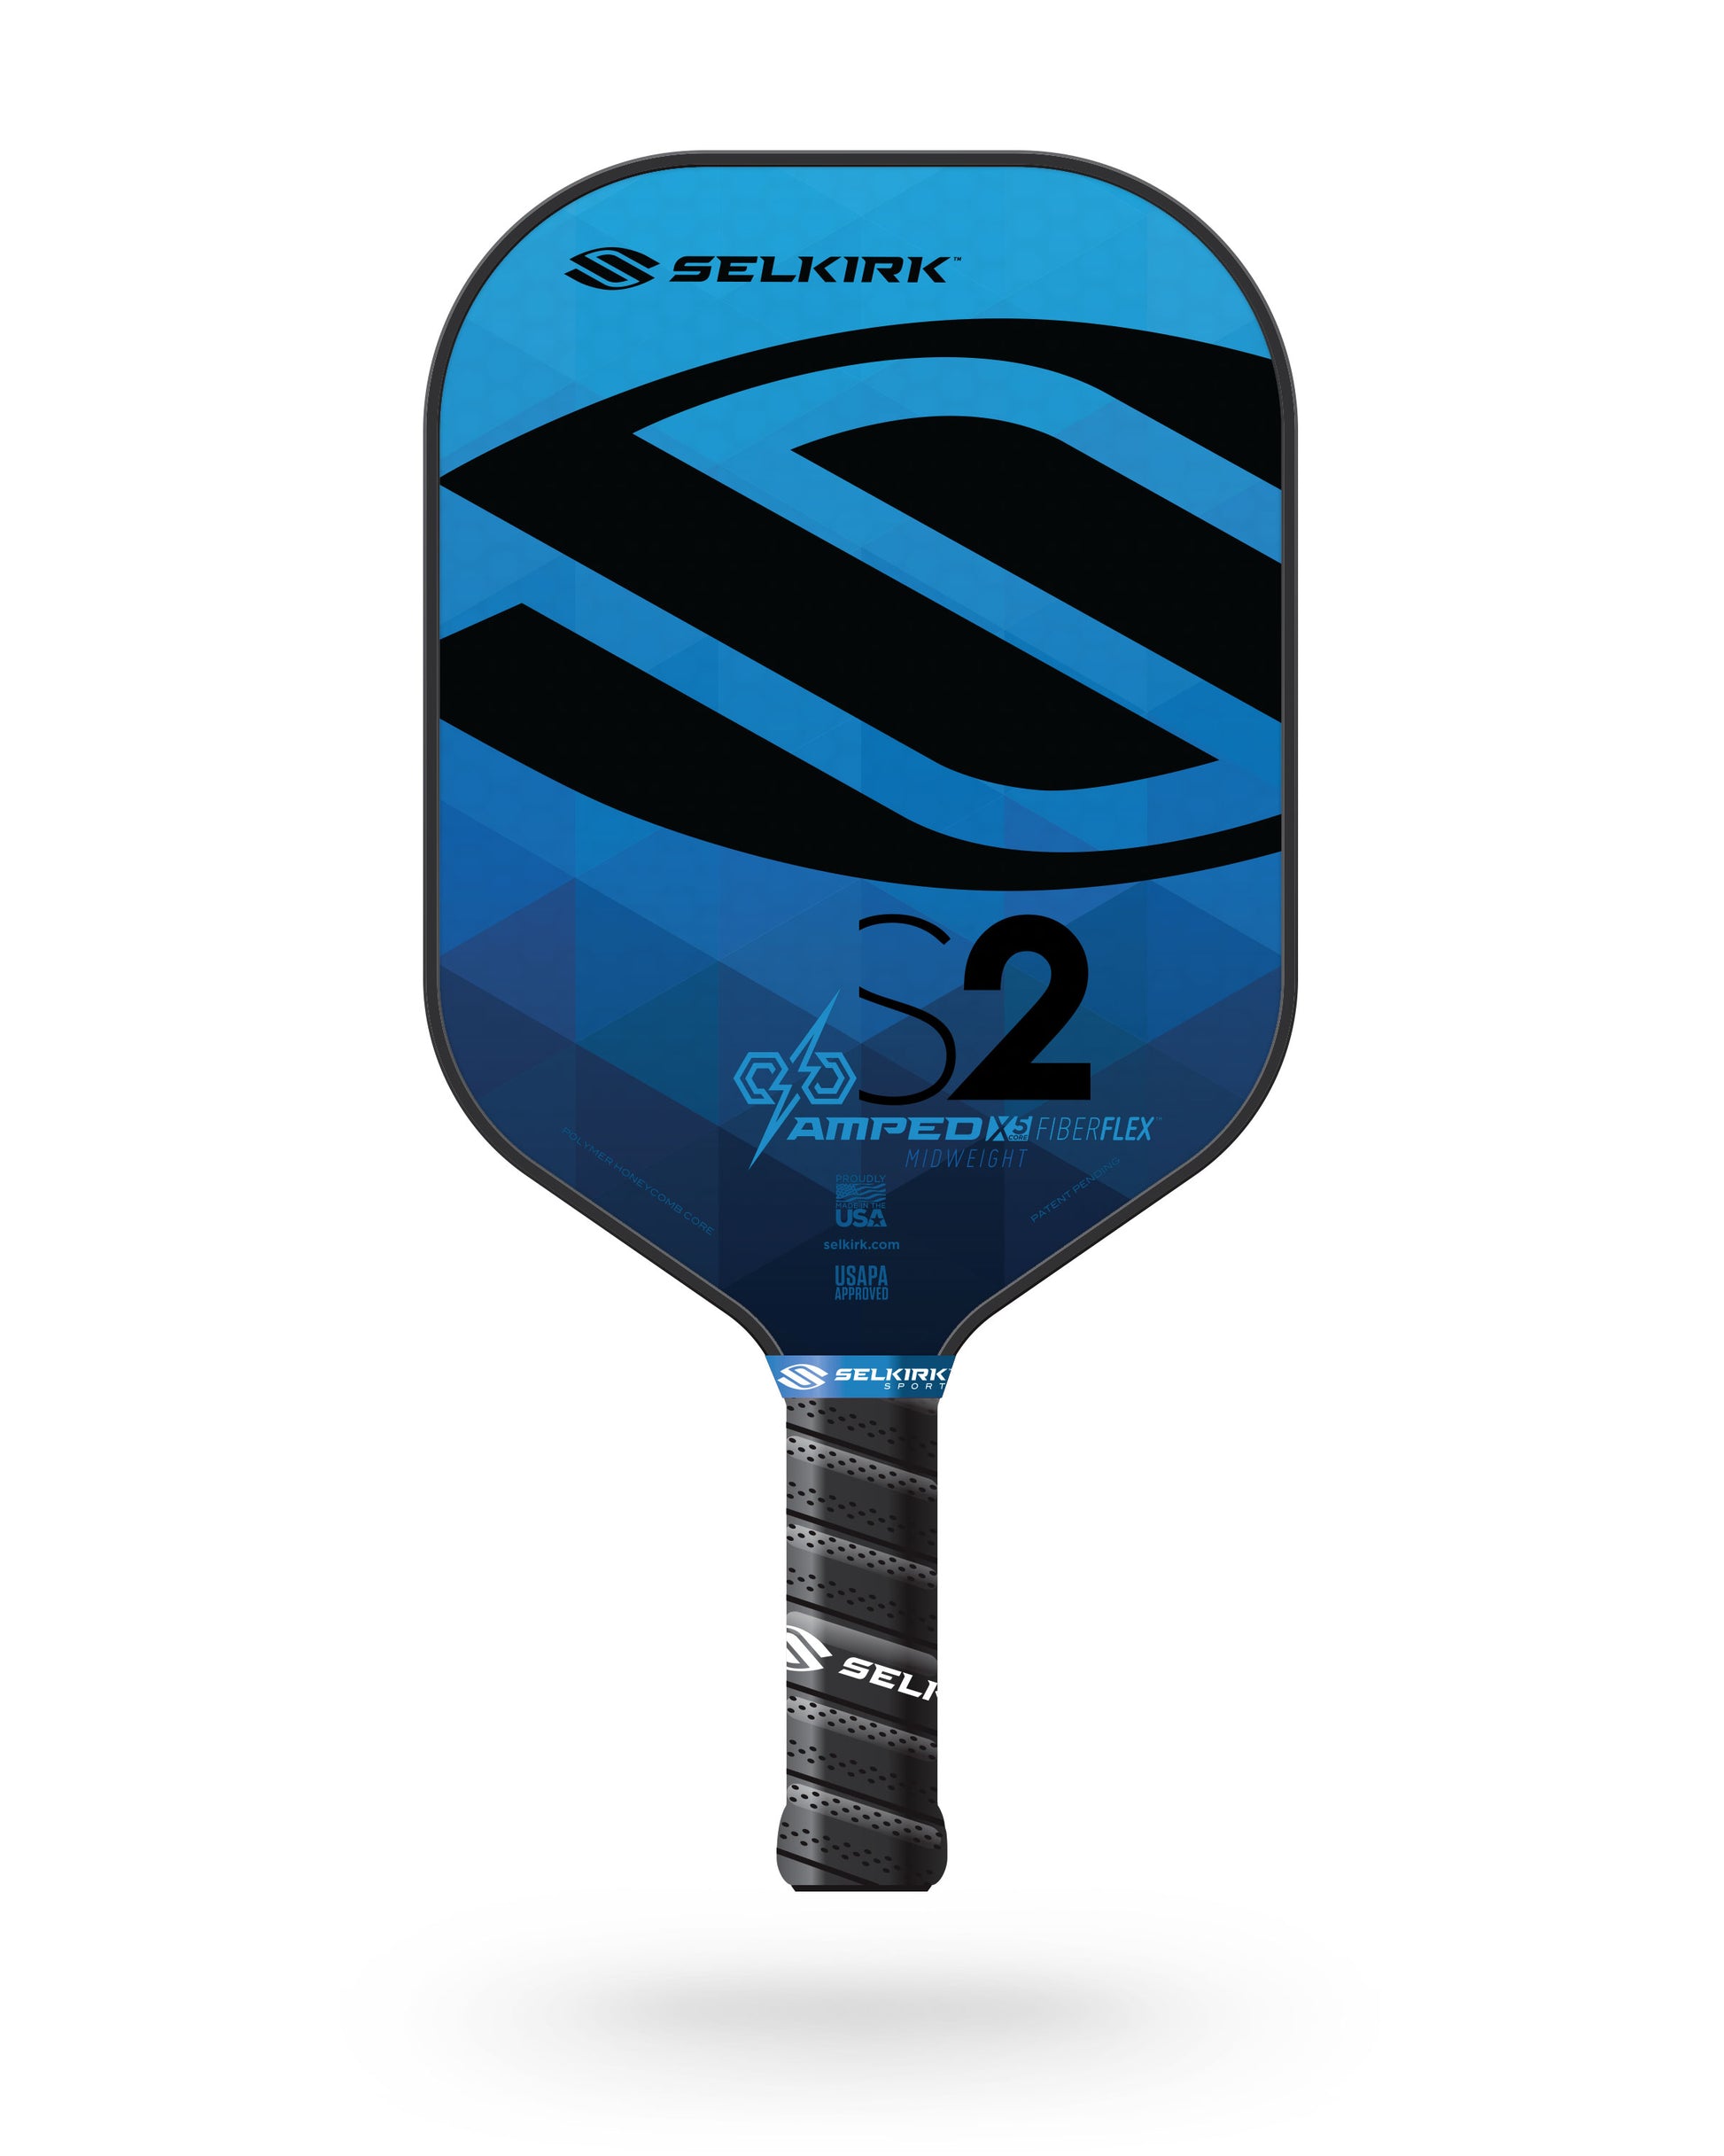 Selkirk AMPED S2 Pickleball Paddle in blue and black